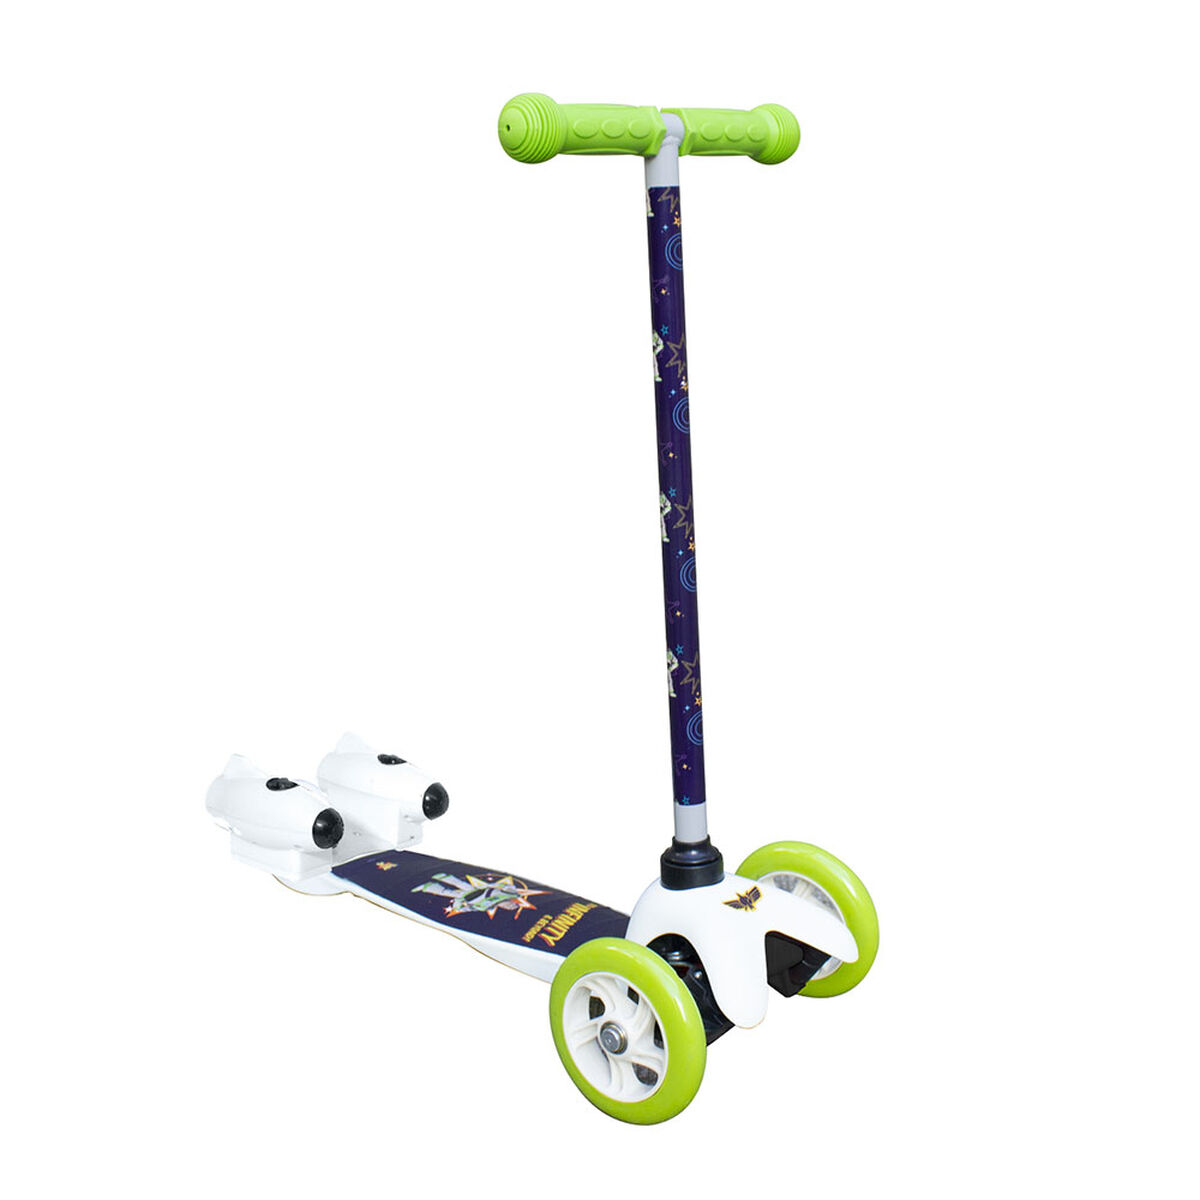 Scooter Toy Story 4 Buzz